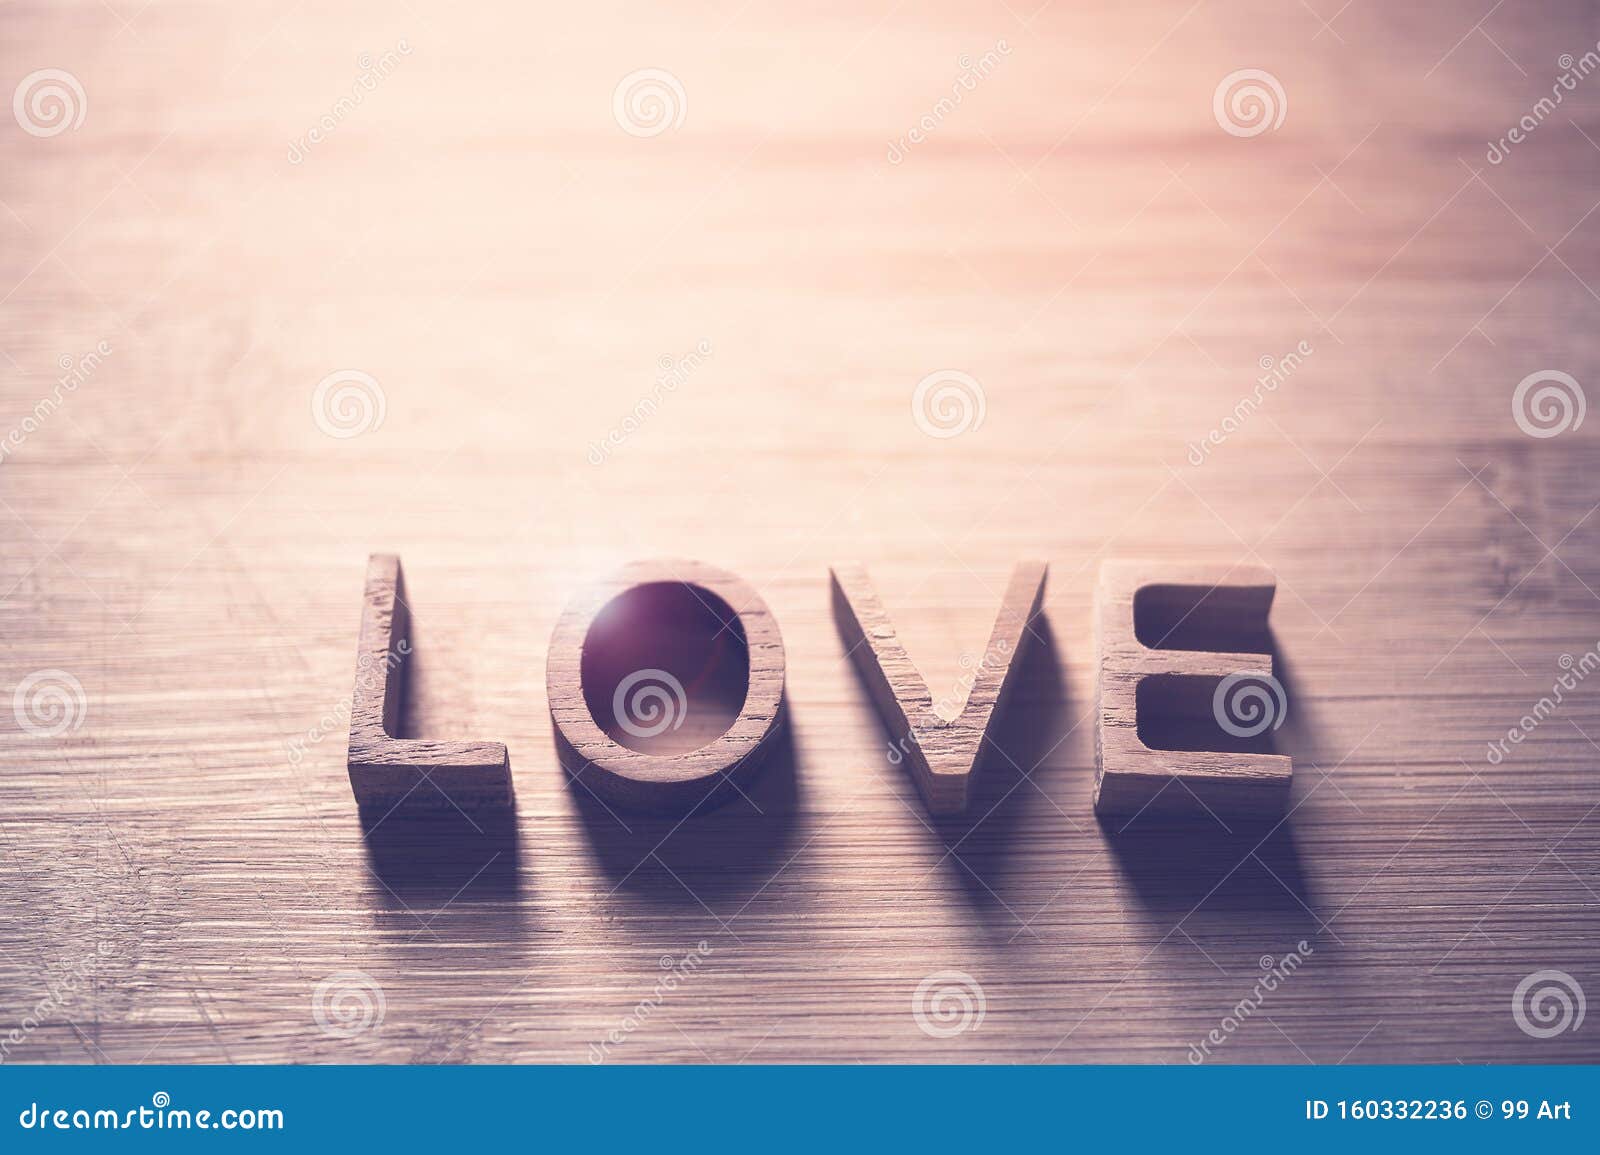 Love Wooden Letters on Rustic Wood Board Background Stock Photo - Image ...